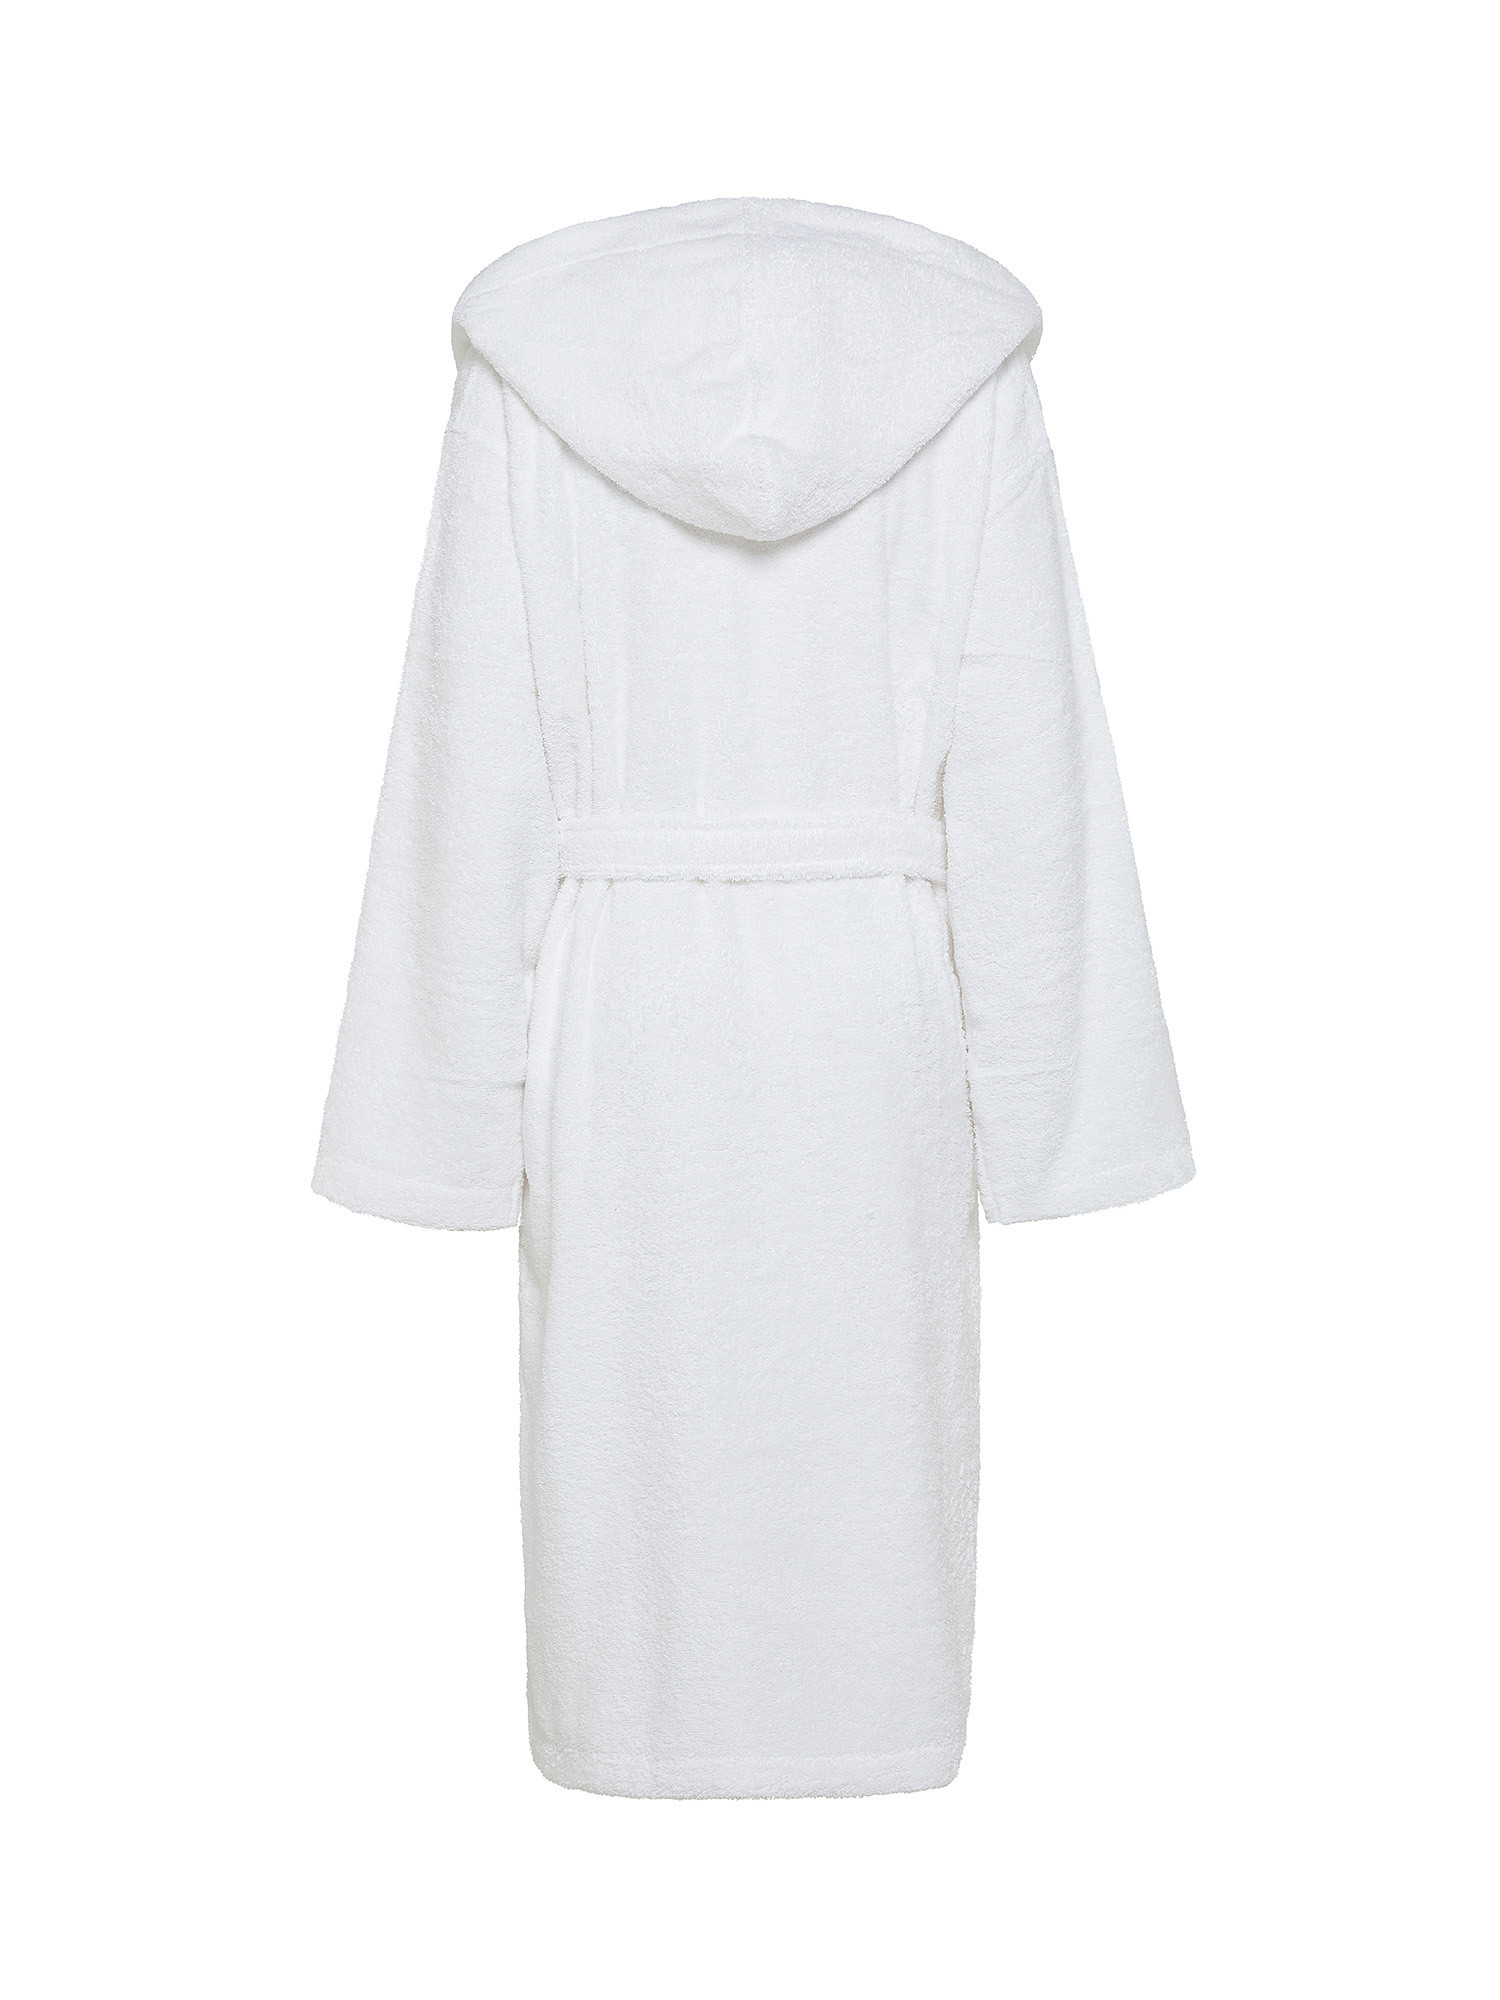 Terry cotton bathrobe with applications, White, large image number 1